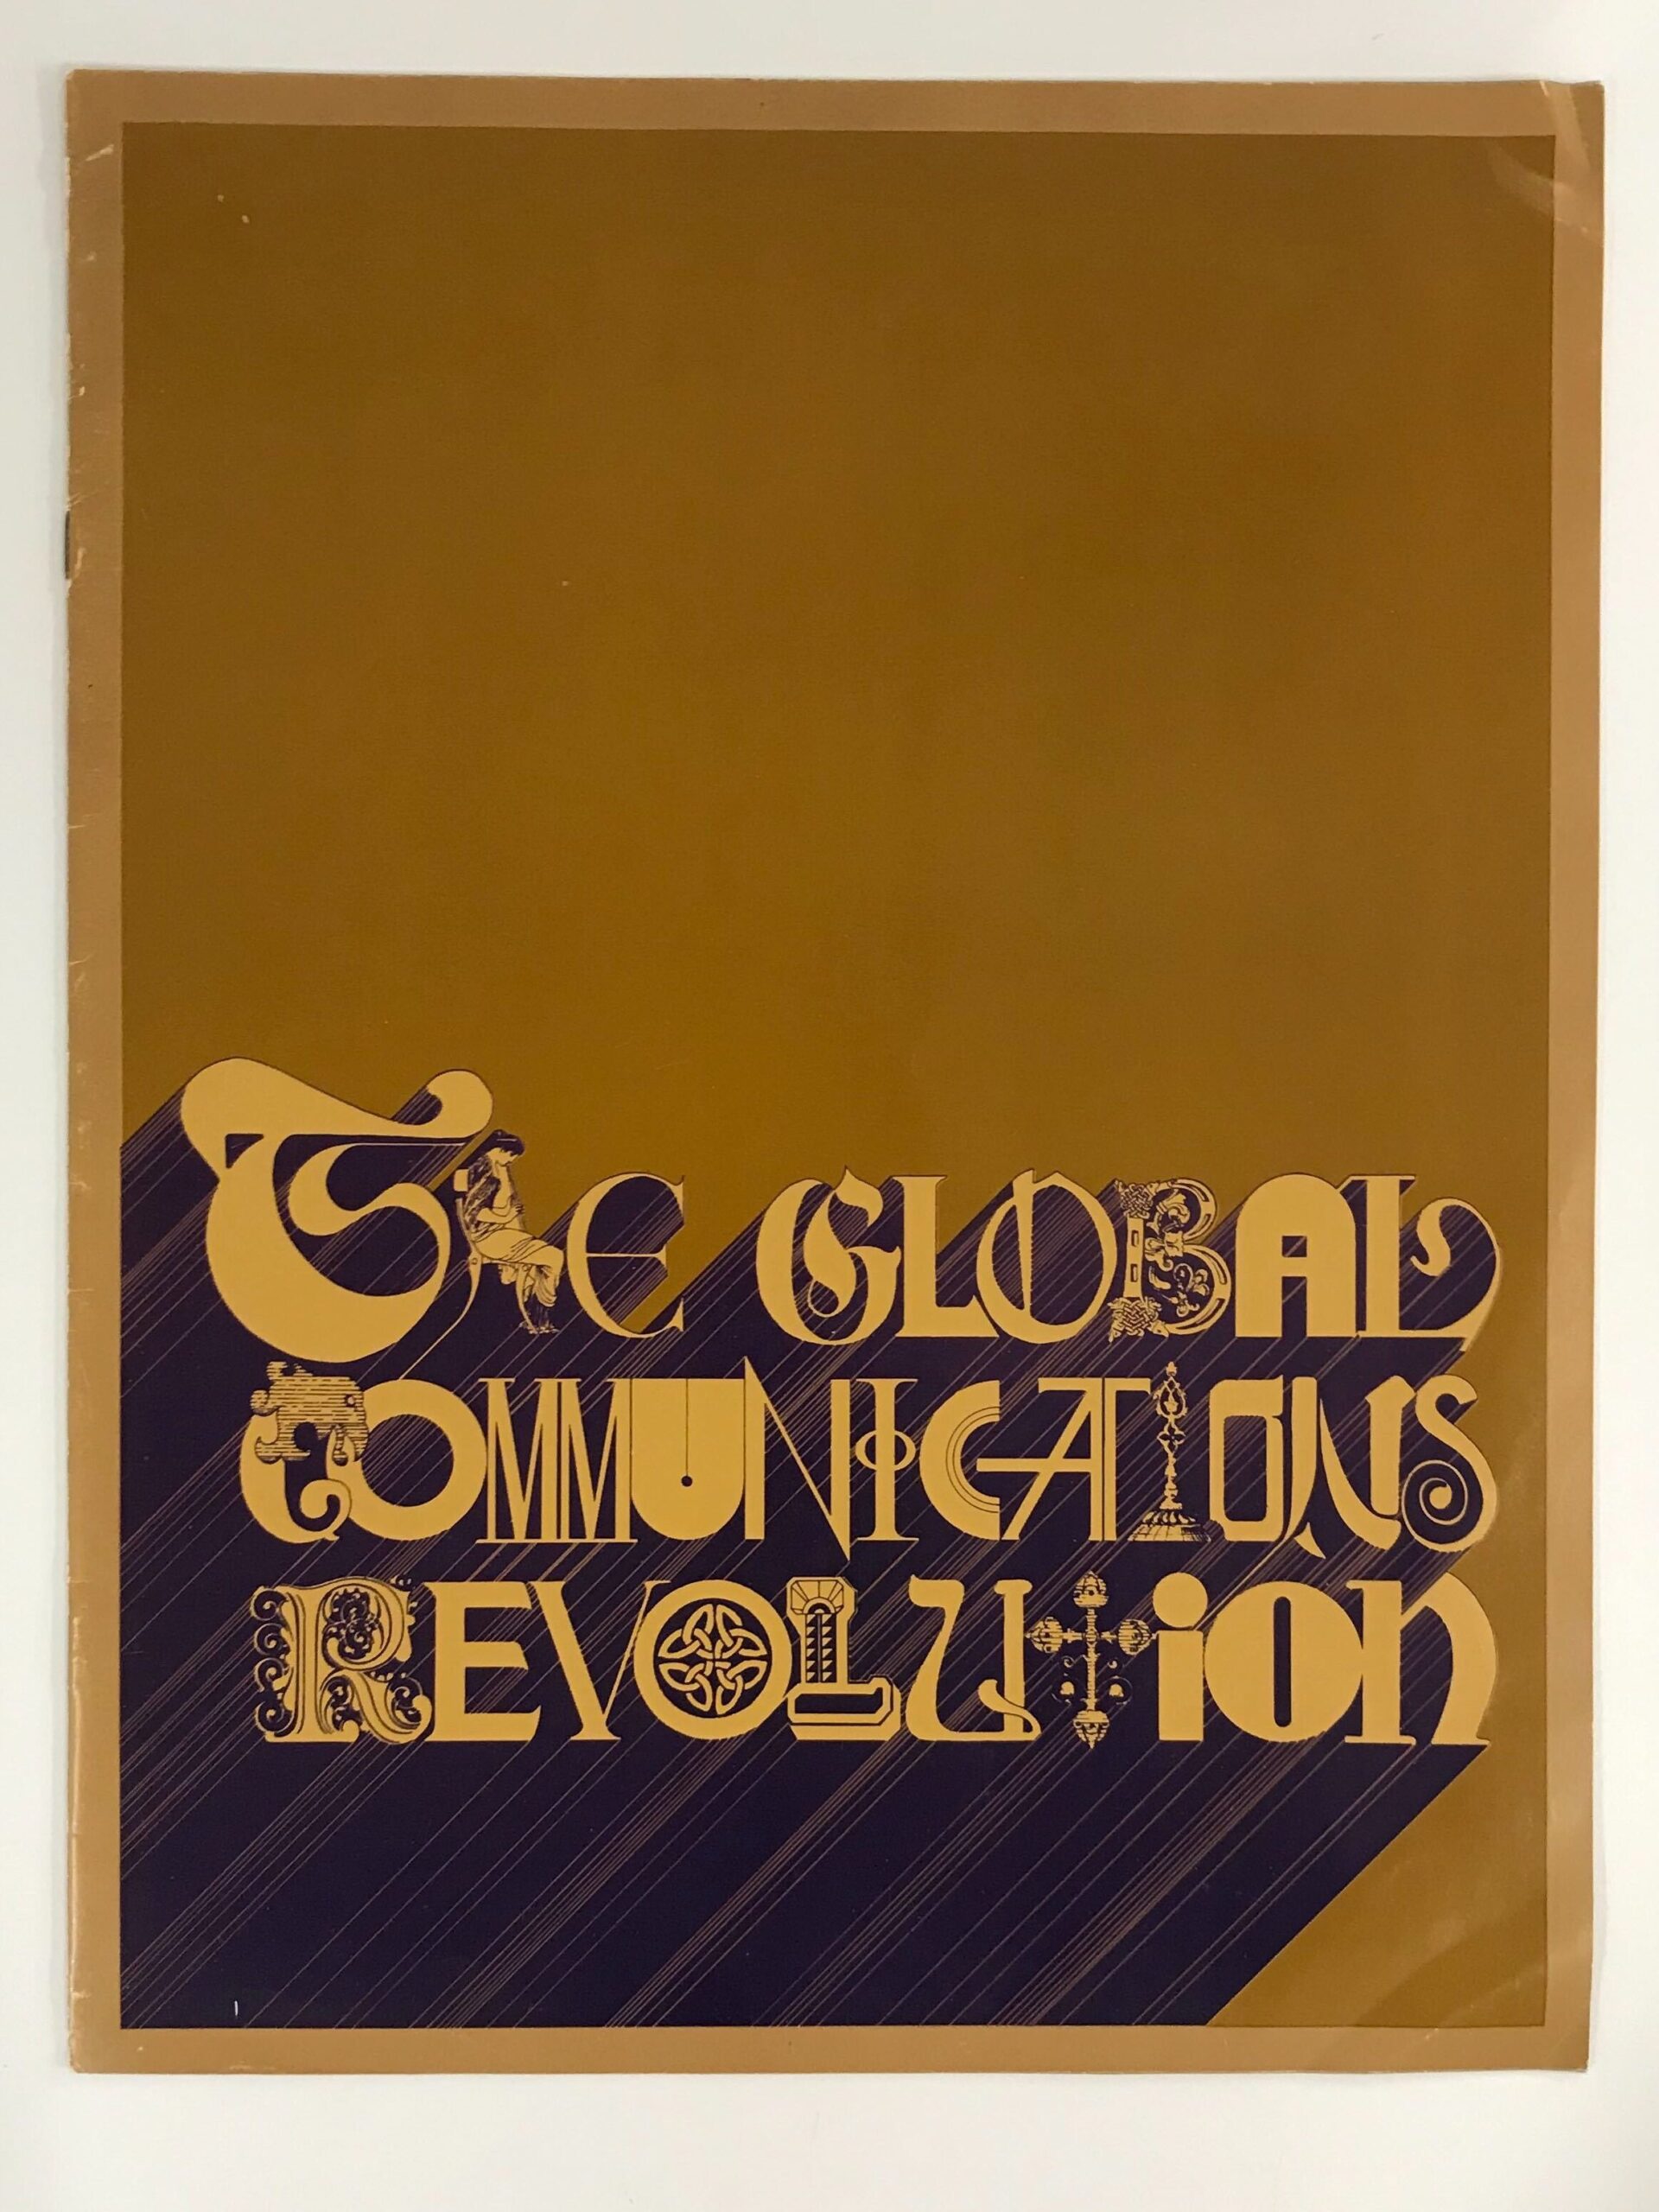 Amber and brown book color with uniquely ornate font spelling out "The Global Communications Revolution"